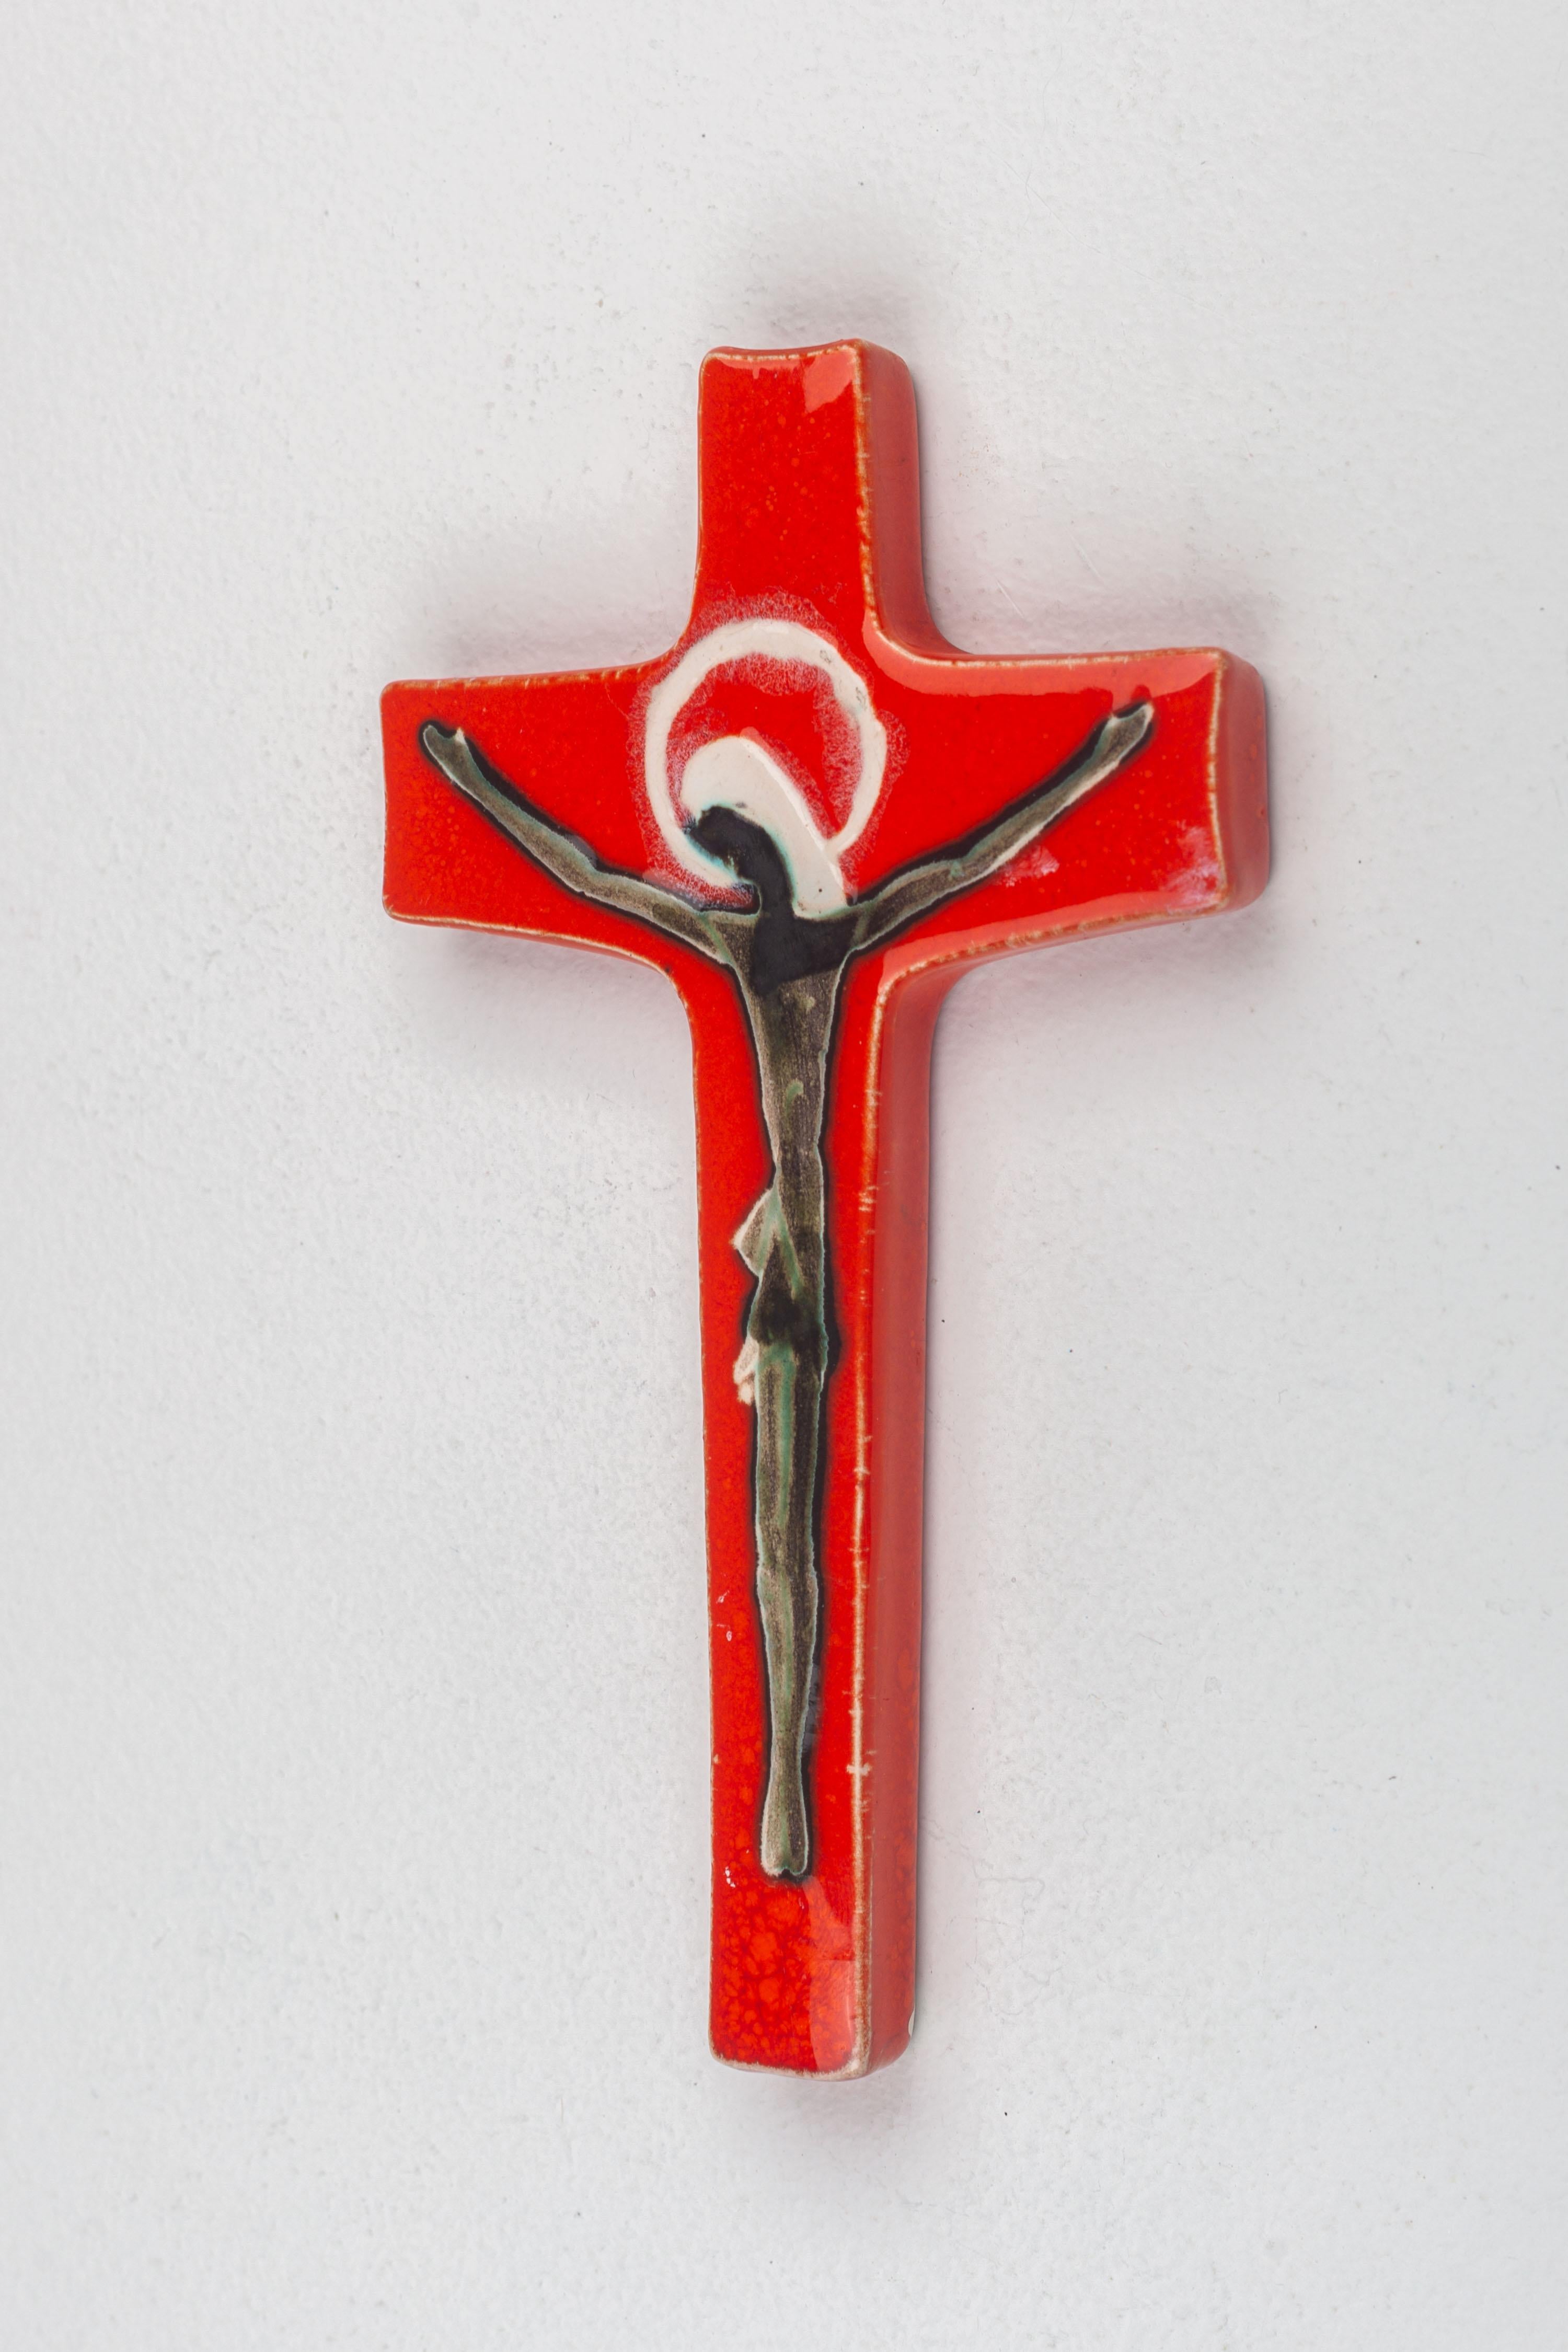 This ceramic crucifix is a sublime representation of mid-century European studio pottery, handcrafted with meticulous care by a skilled artisan. The cross is enveloped in a vibrant vermillion glaze, giving it an almost ethereal glow against the